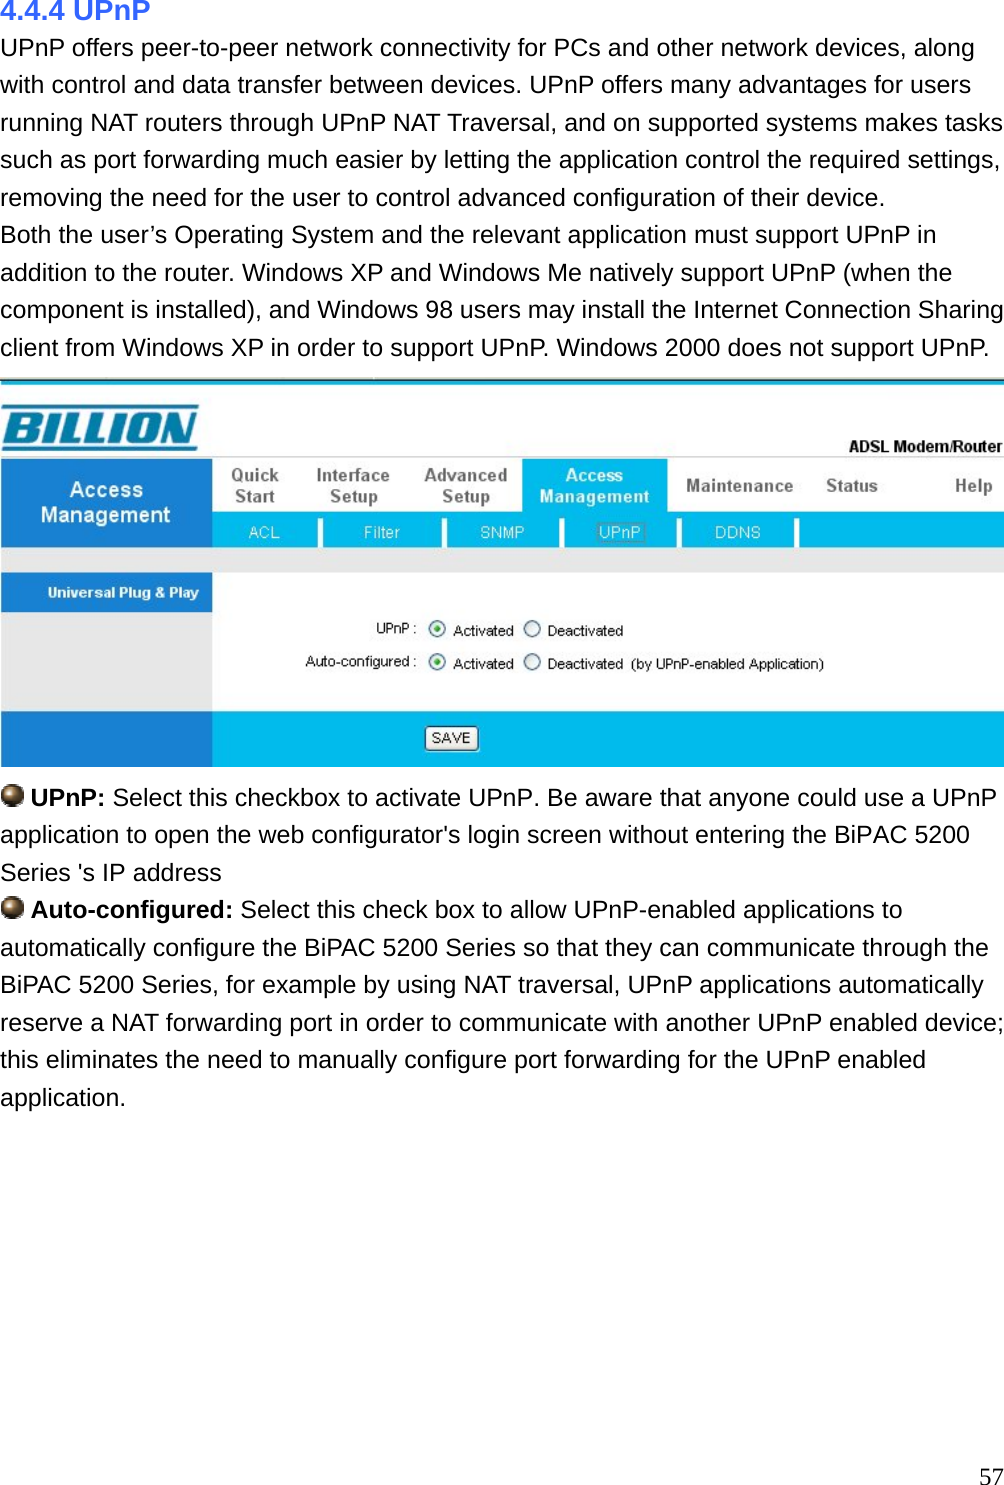 4.4.4 UPnP UPnP offers peer-to-peer network connectivity for PCs and other network devices, along with control and data transfer between devices. UPnP offers many advantages for users running NAT routers through UPnP NAT Traversal, and on supported systems makes tasks such as port forwarding much easier by letting the application control the required settings, removing the need for the user to control advanced configuration of their device. Both the user’s Operating System and the relevant application must support UPnP in addition to the router. Windows XP and Windows Me natively support UPnP (when the component is installed), and Windows 98 users may install the Internet Connection Sharing client from Windows XP in order to support UPnP. Windows 2000 does not support UPnP.   UPnP: Select this checkbox to activate UPnP. Be aware that anyone could use a UPnP application to open the web configurator&apos;s login screen without entering the BiPAC 5200 Series &apos;s IP address  Auto-configured: Select this check box to allow UPnP-enabled applications to automatically configure the BiPAC 5200 Series so that they can communicate through the BiPAC 5200 Series, for example by using NAT traversal, UPnP applications automatically reserve a NAT forwarding port in order to communicate with another UPnP enabled device; this eliminates the need to manually configure port forwarding for the UPnP enabled application.          57